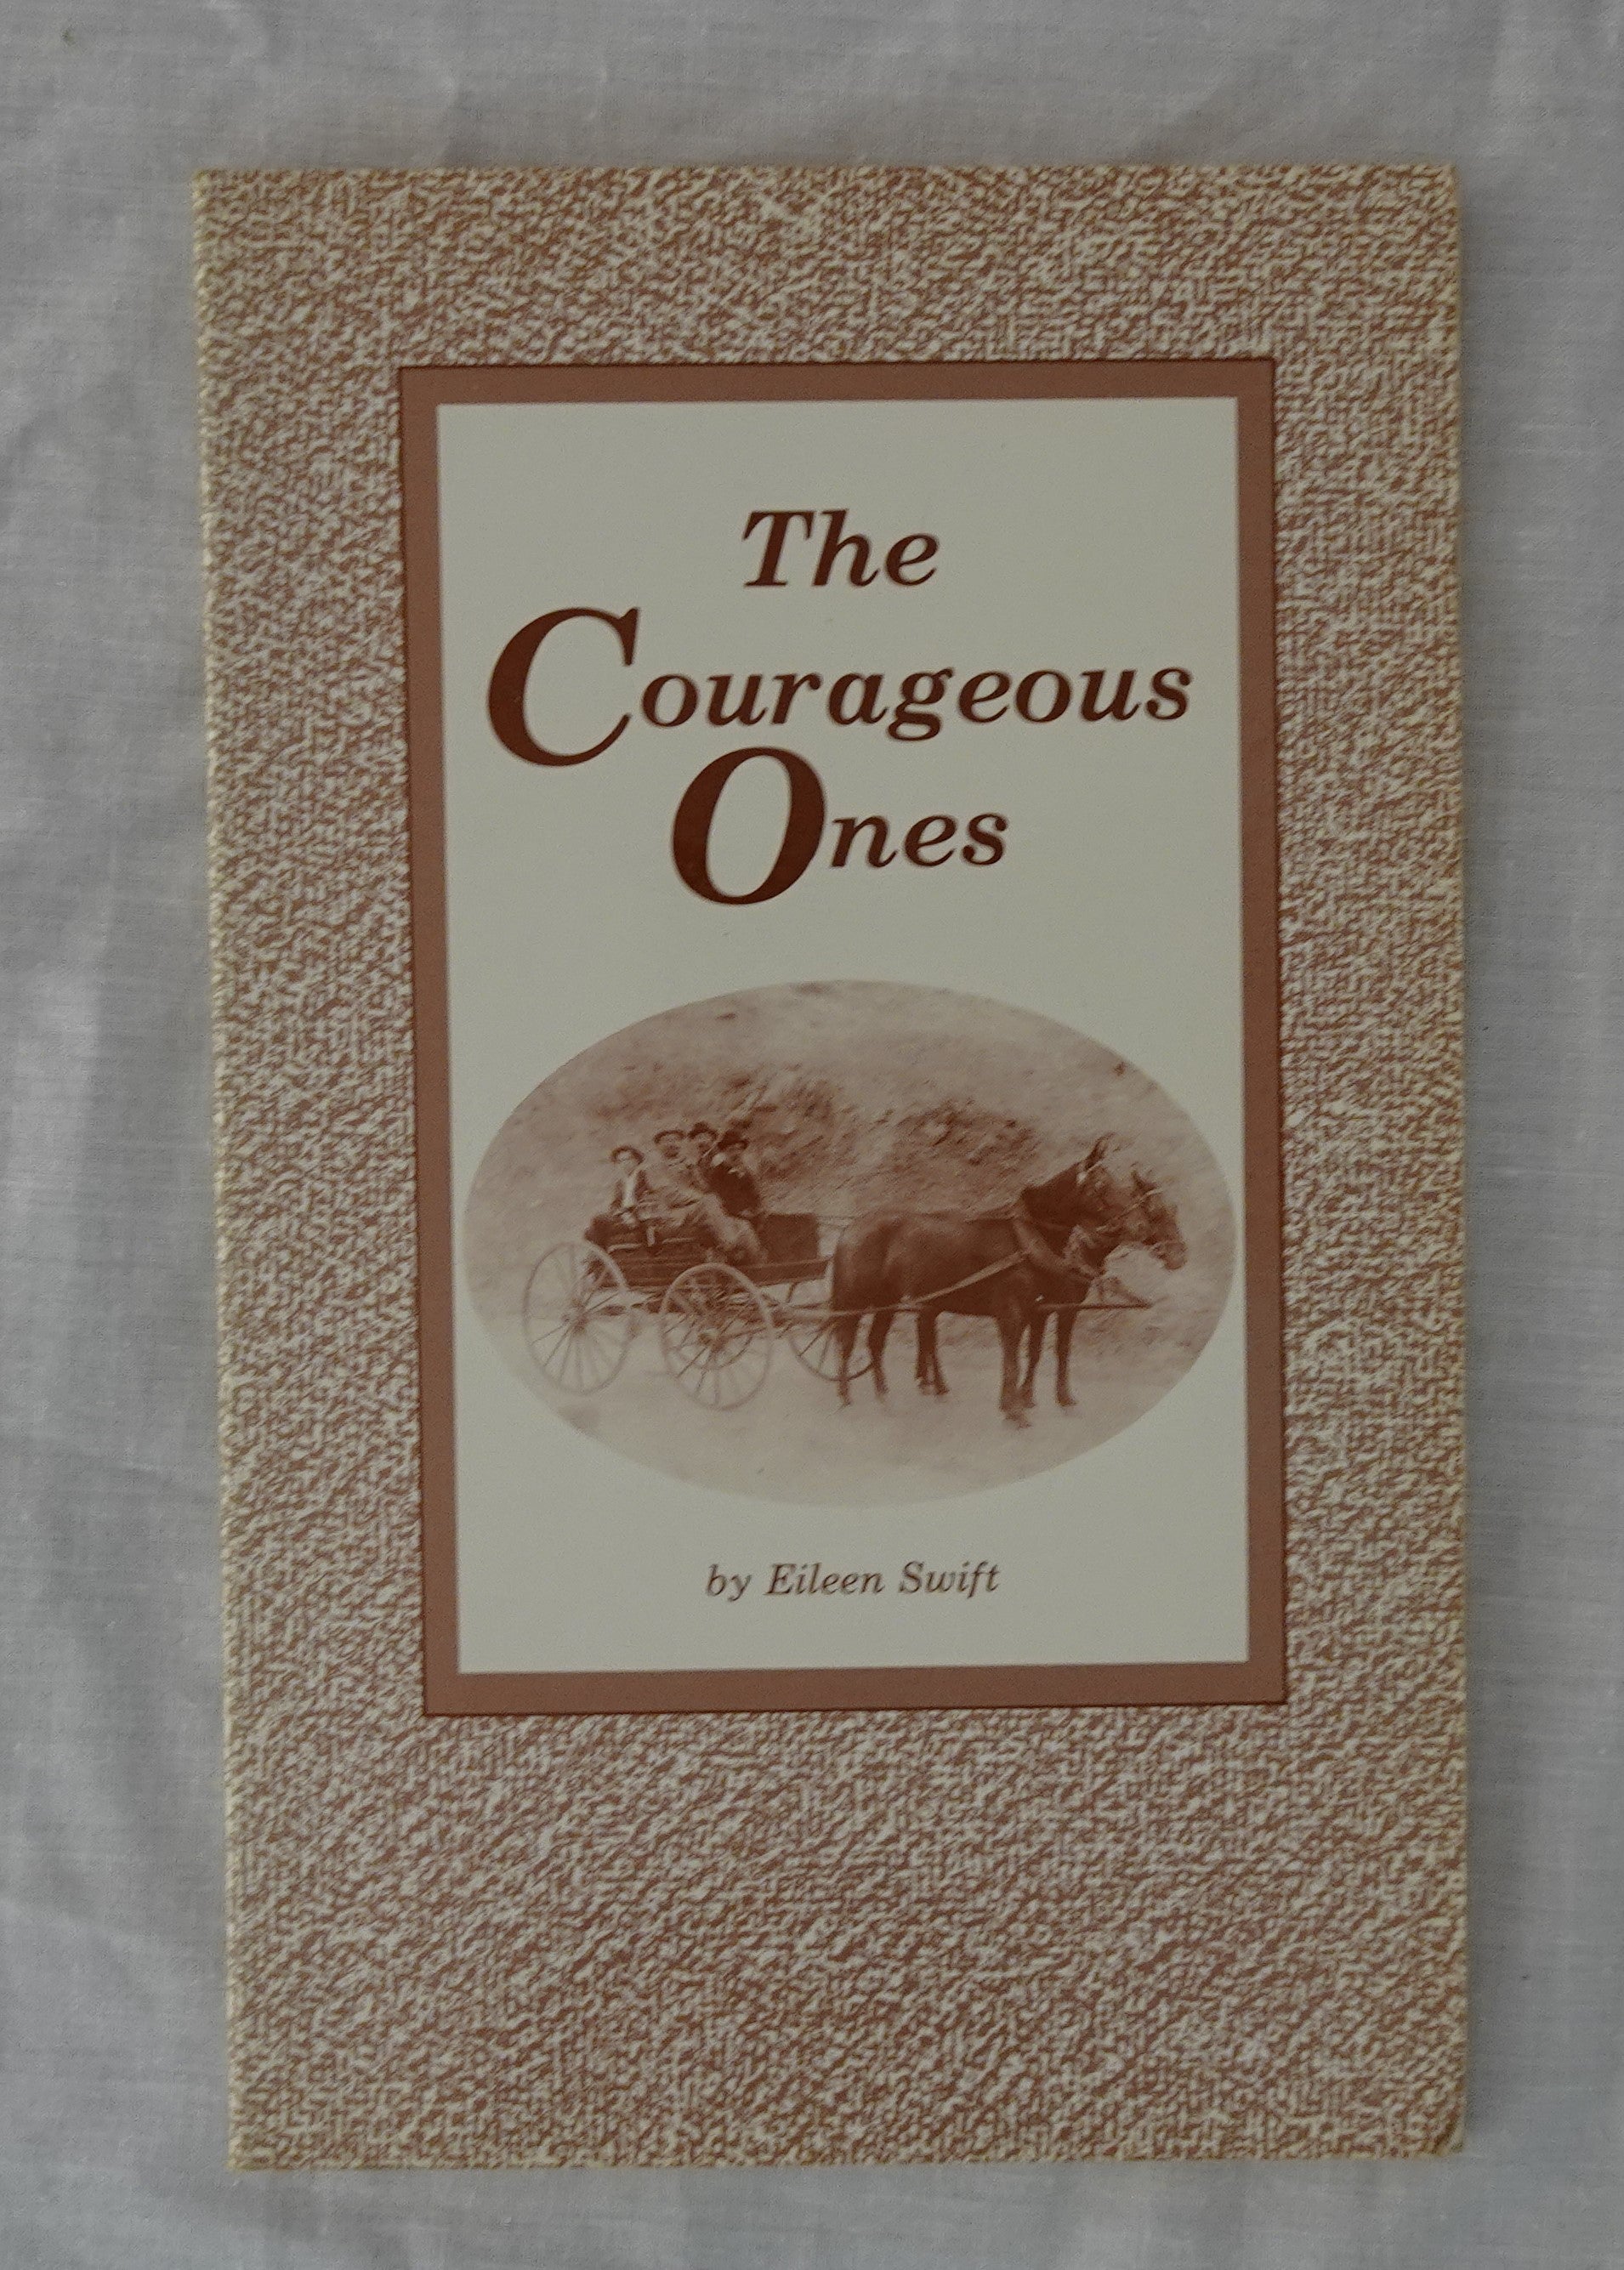 The Courageous Ones by Eileen Swift